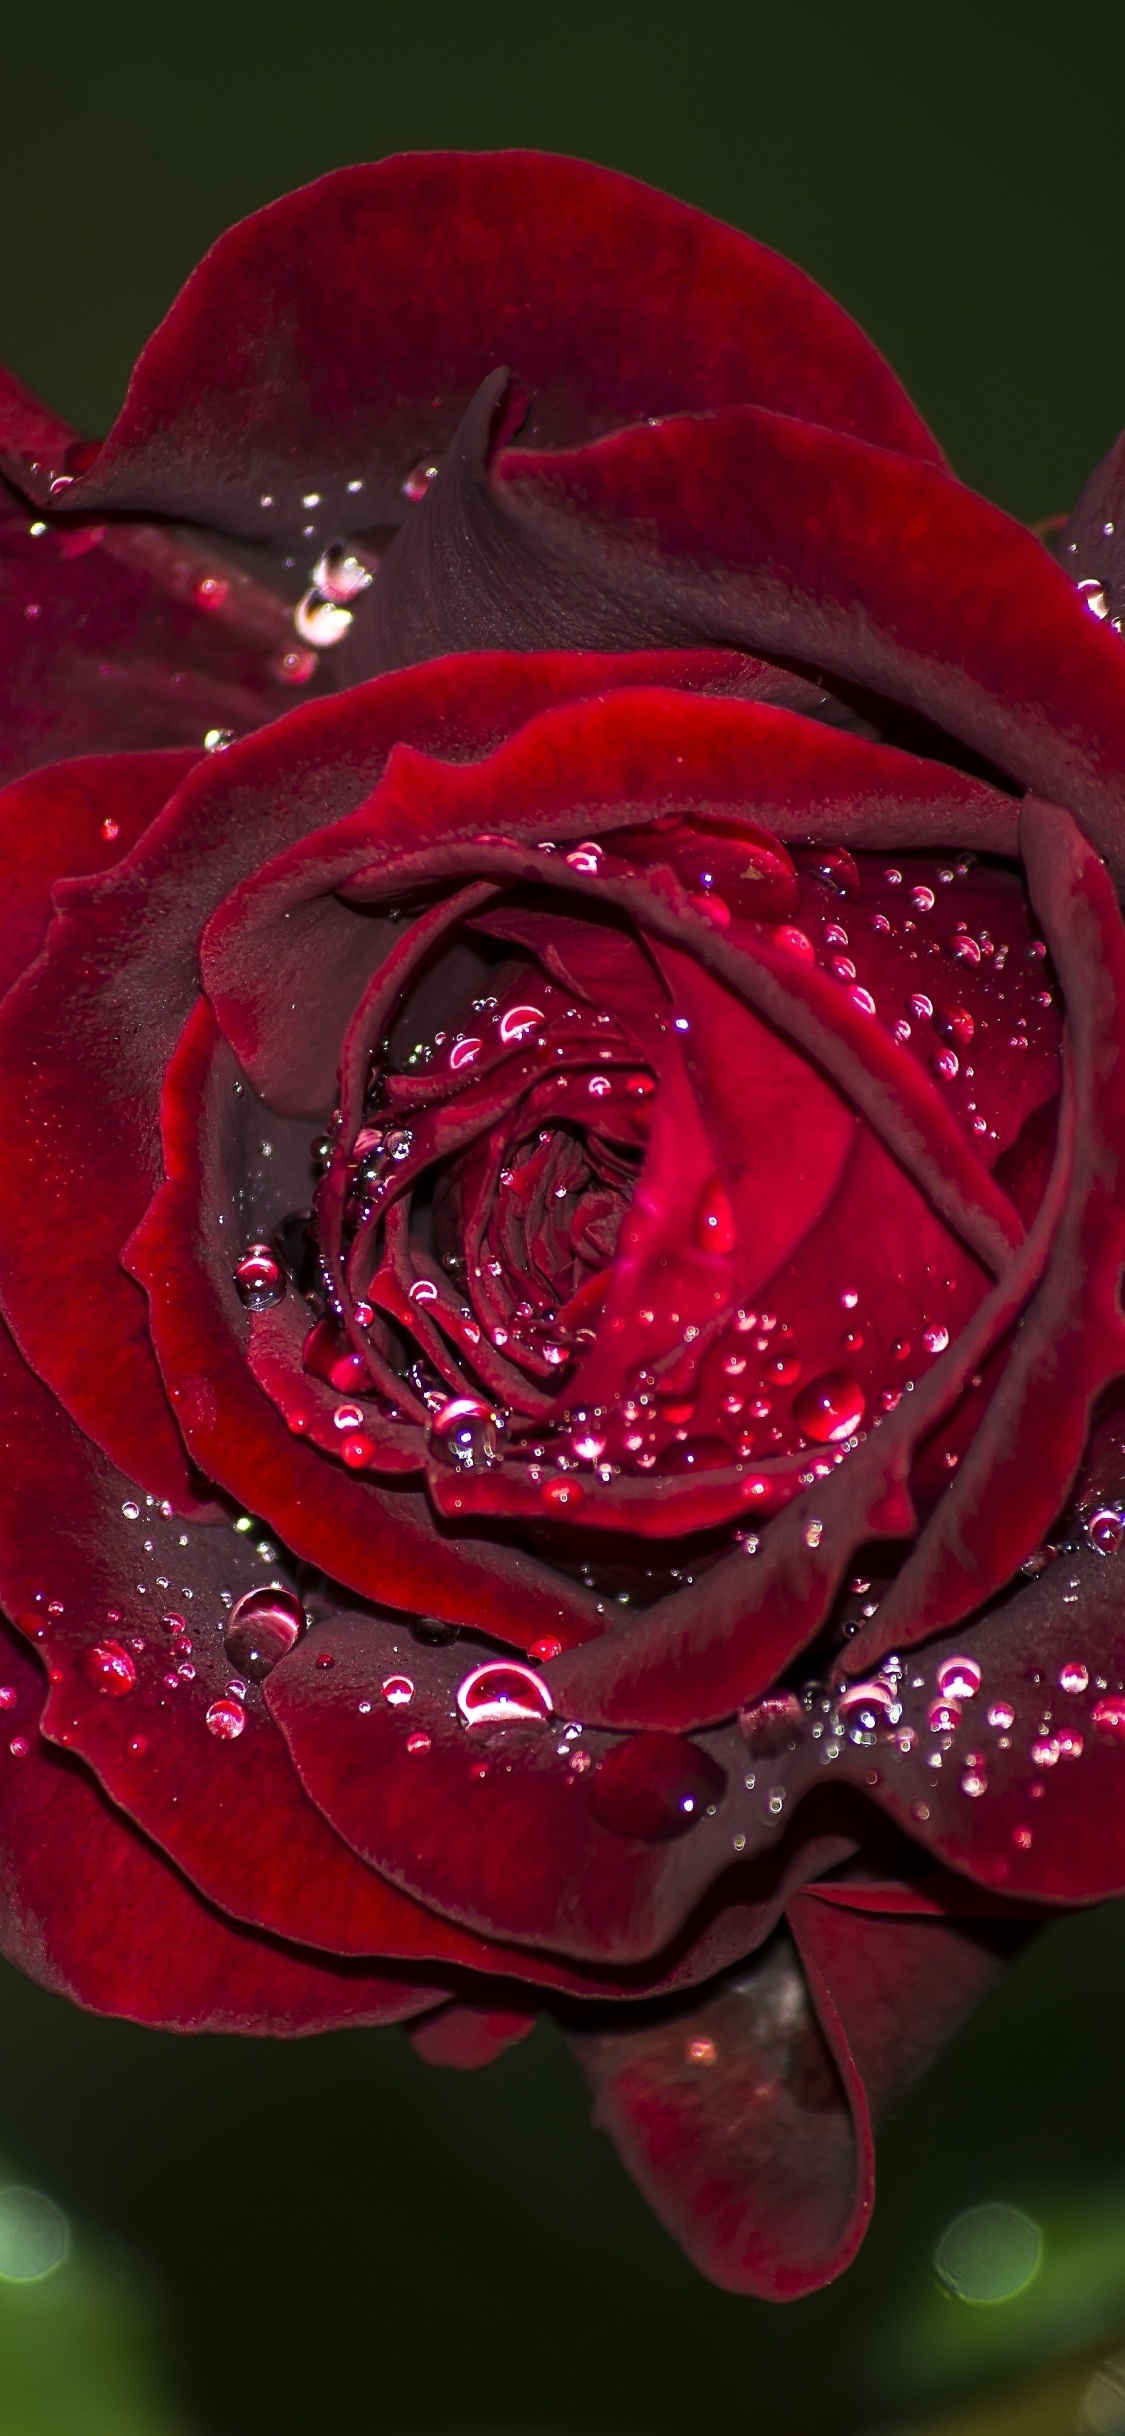 Red Rose in Bloom With Dew Drops. Wallpaper in 1125x2436 Resolution